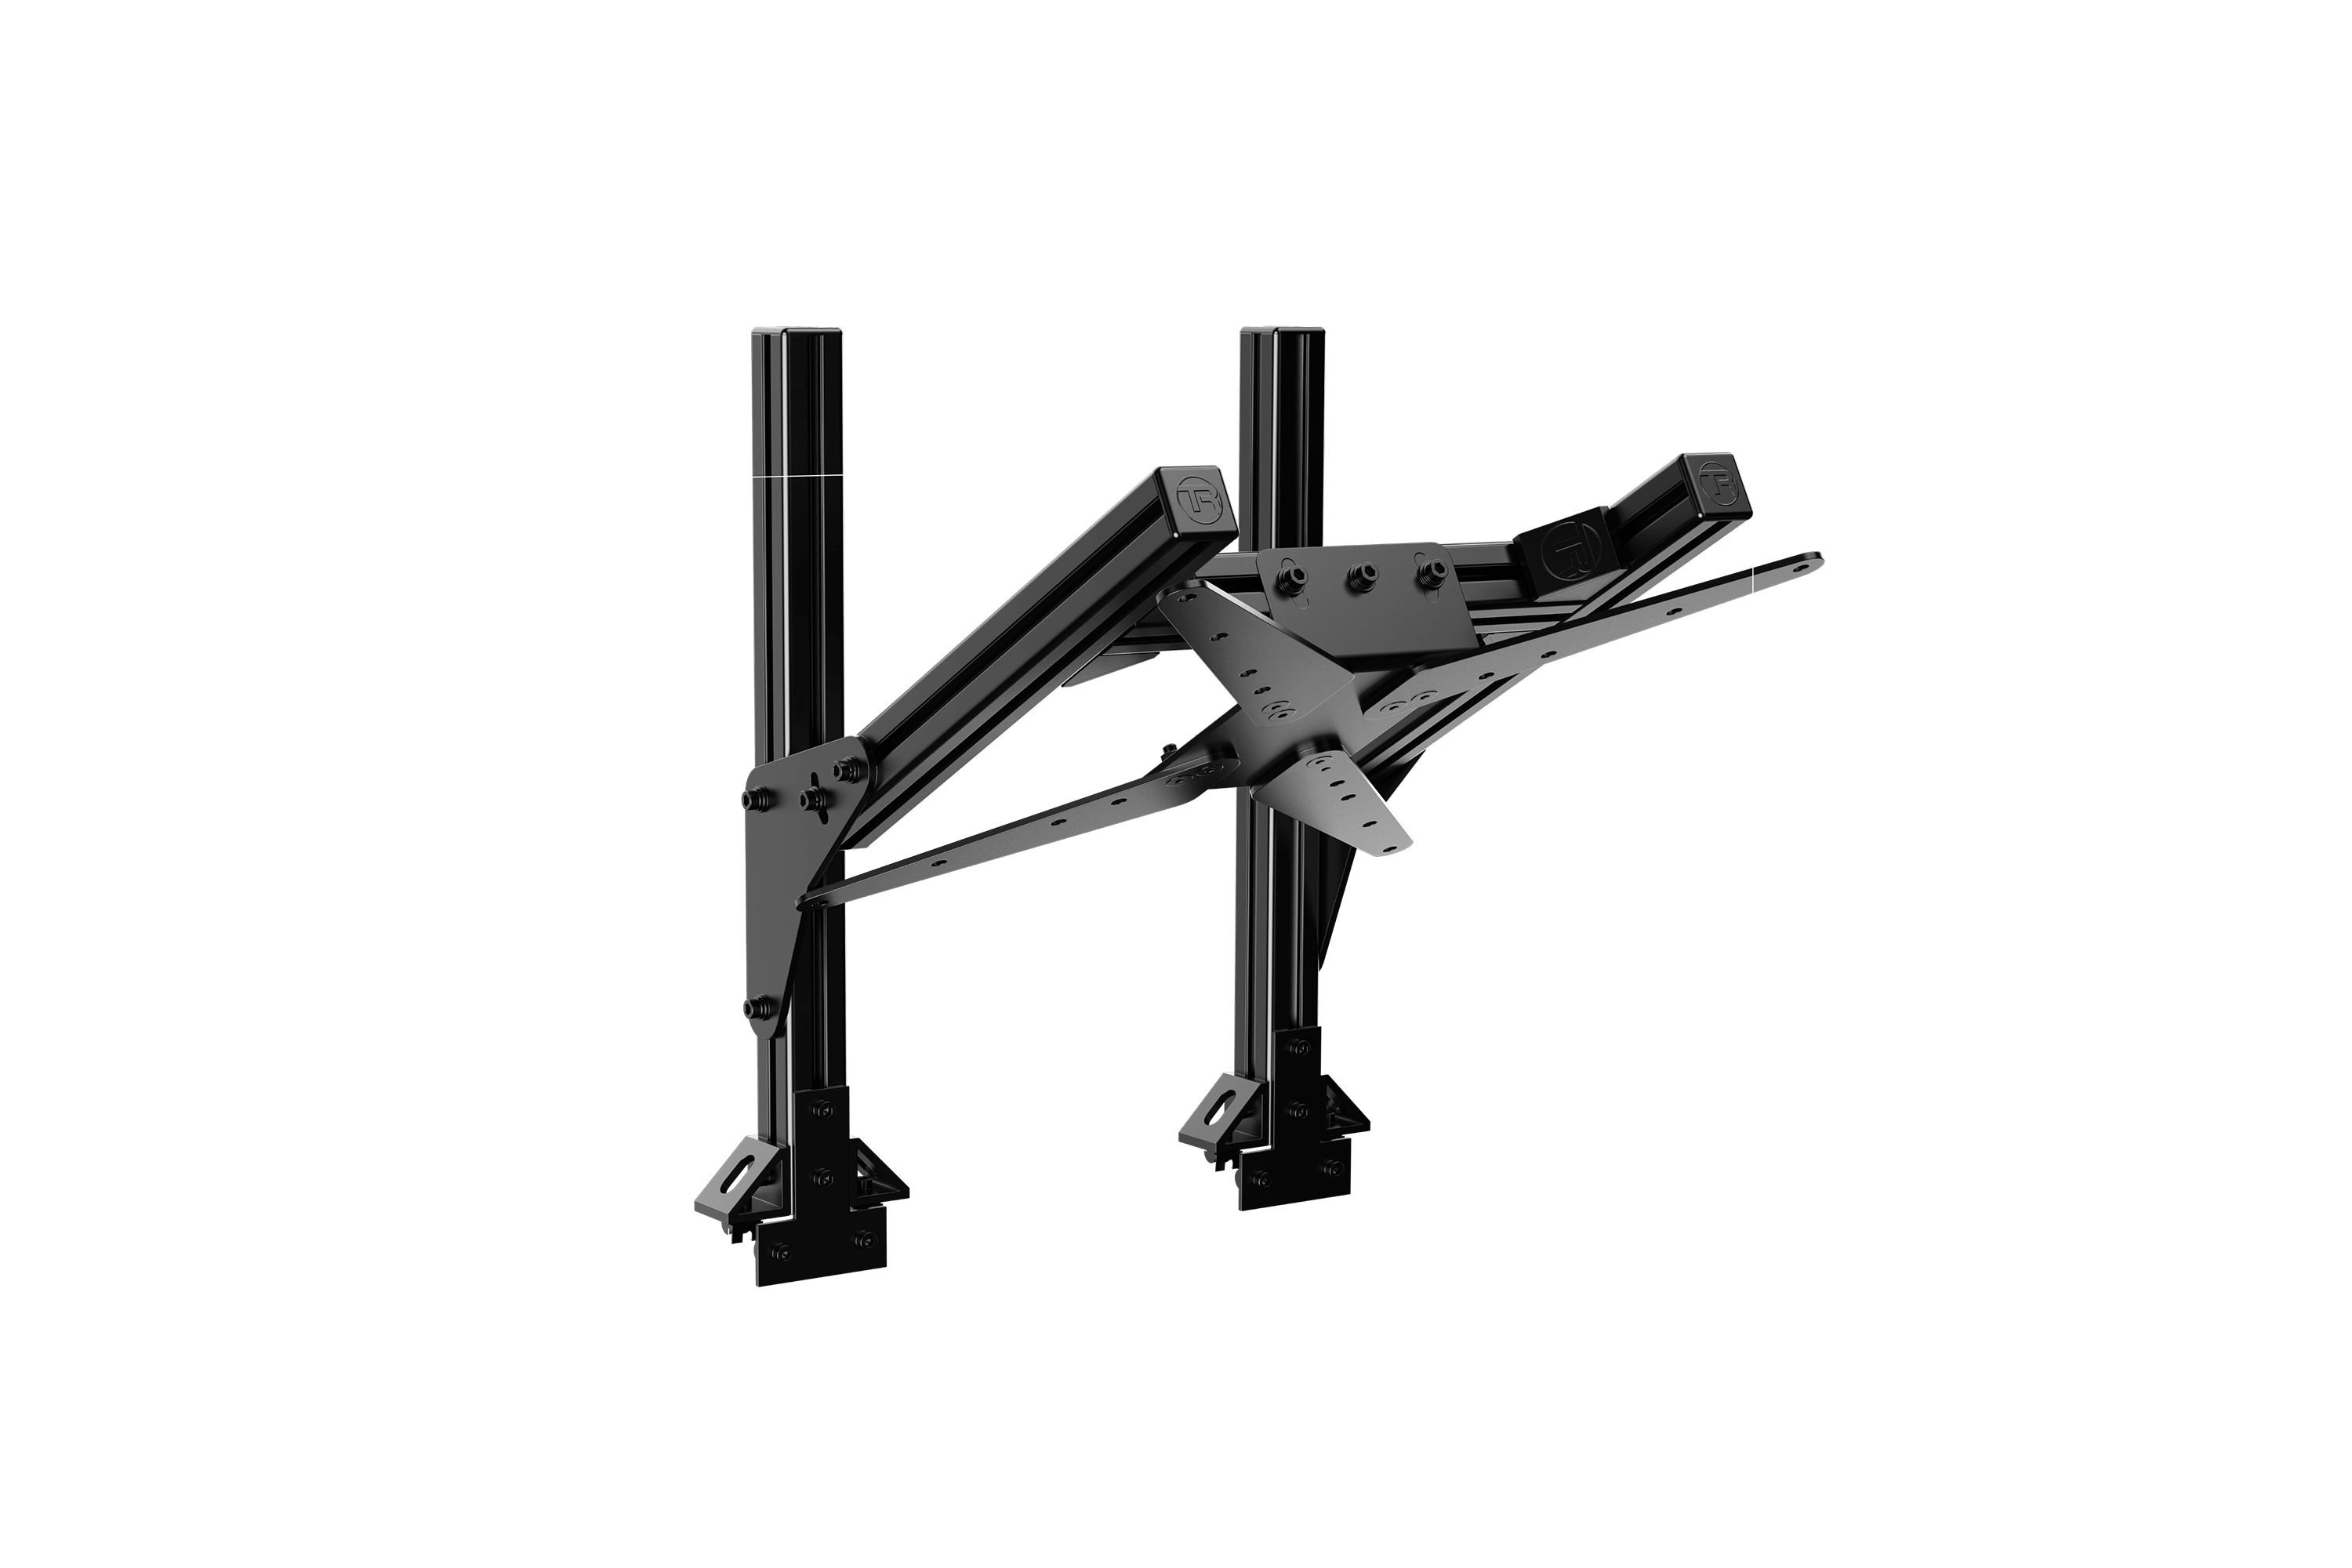 4th/2nd Top Monitor Mount for Extrusion Monitor Stands